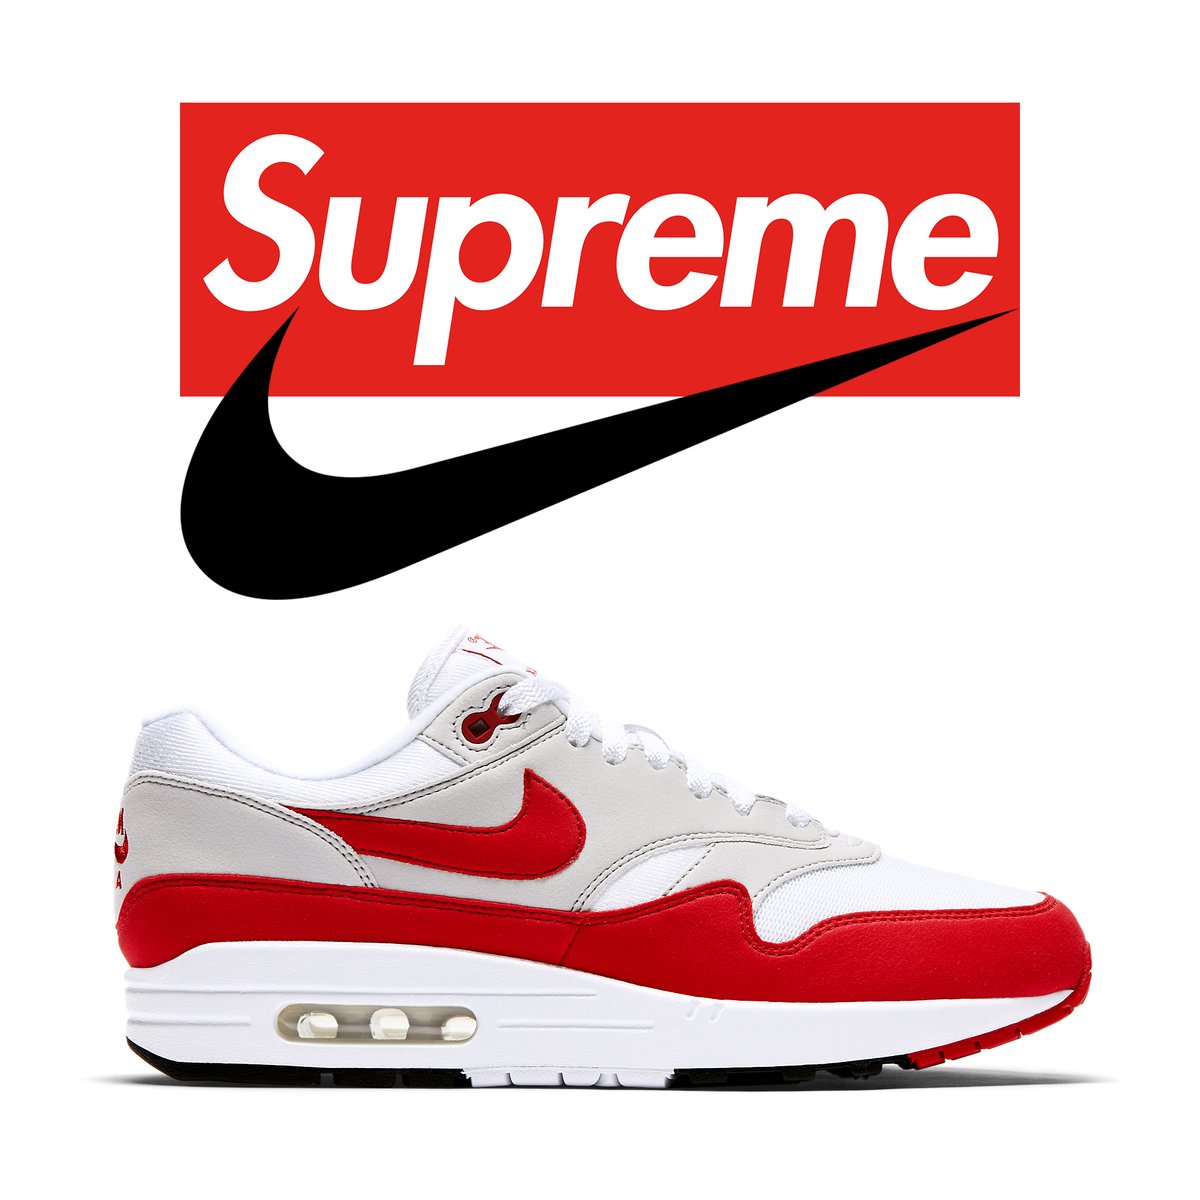 Supreme x Nike Air Max 1

Expected to be releasing for Spring/Summer 2025, Supreme will be collaborating with Nike on a set of Air Max 1 🔥

Stay tuned for more details on the design and mockups to come 🔜

Source: @brendandunne